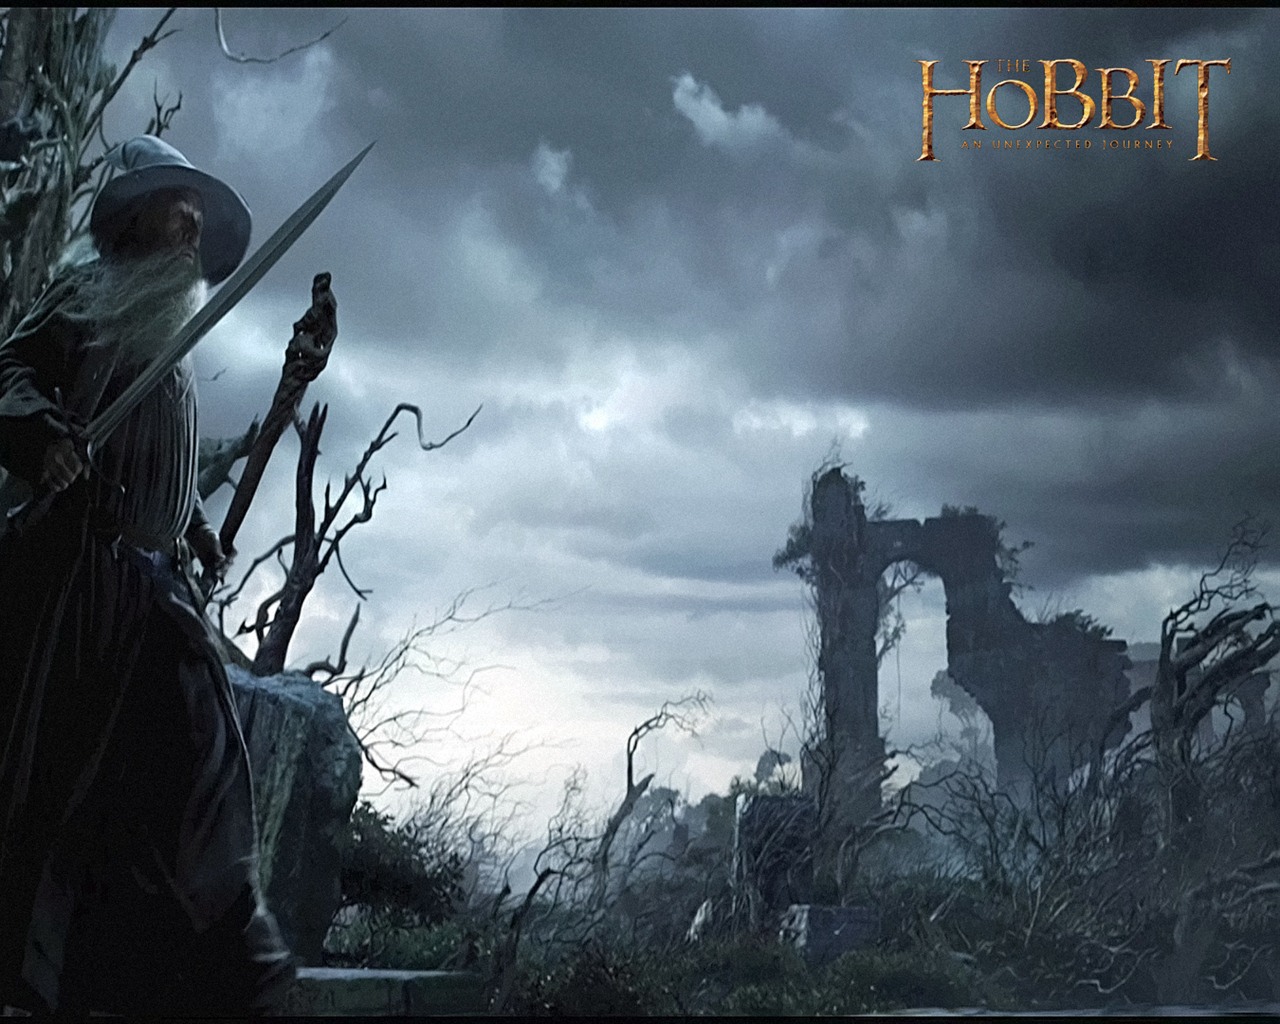 The Hobbit: An Unexpected Journey HD wallpapers #13 - 1280x1024